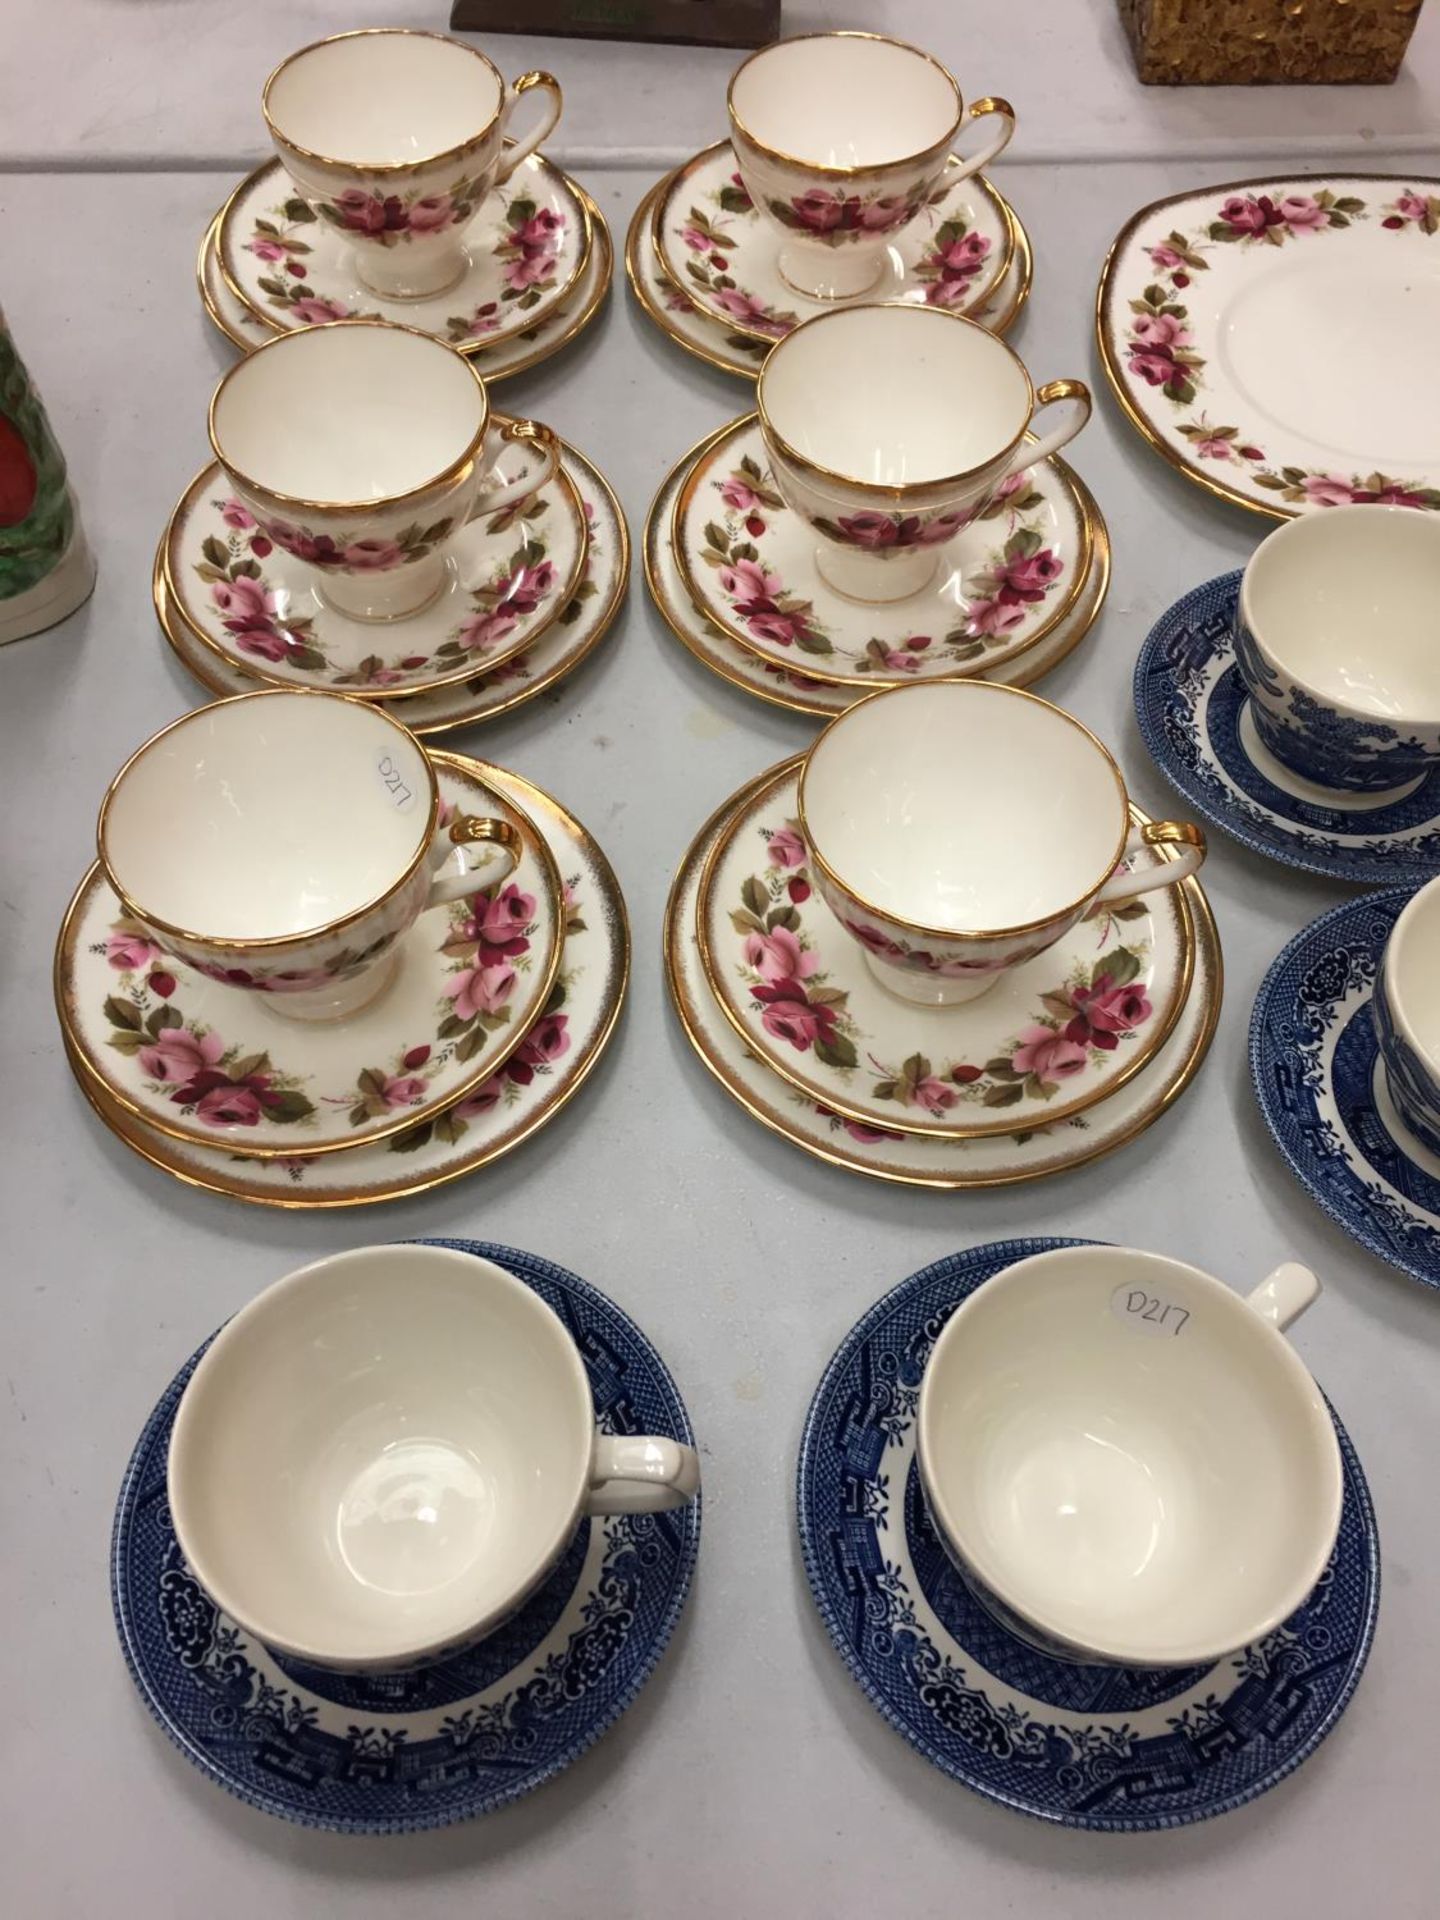 A SET OF SIX ELLIS SYKES FINE BONE CHINA TRIOS AND A SET OF SIX BLUE WILLOW PATTERN CUPS AND SAUCERS - Image 3 of 5